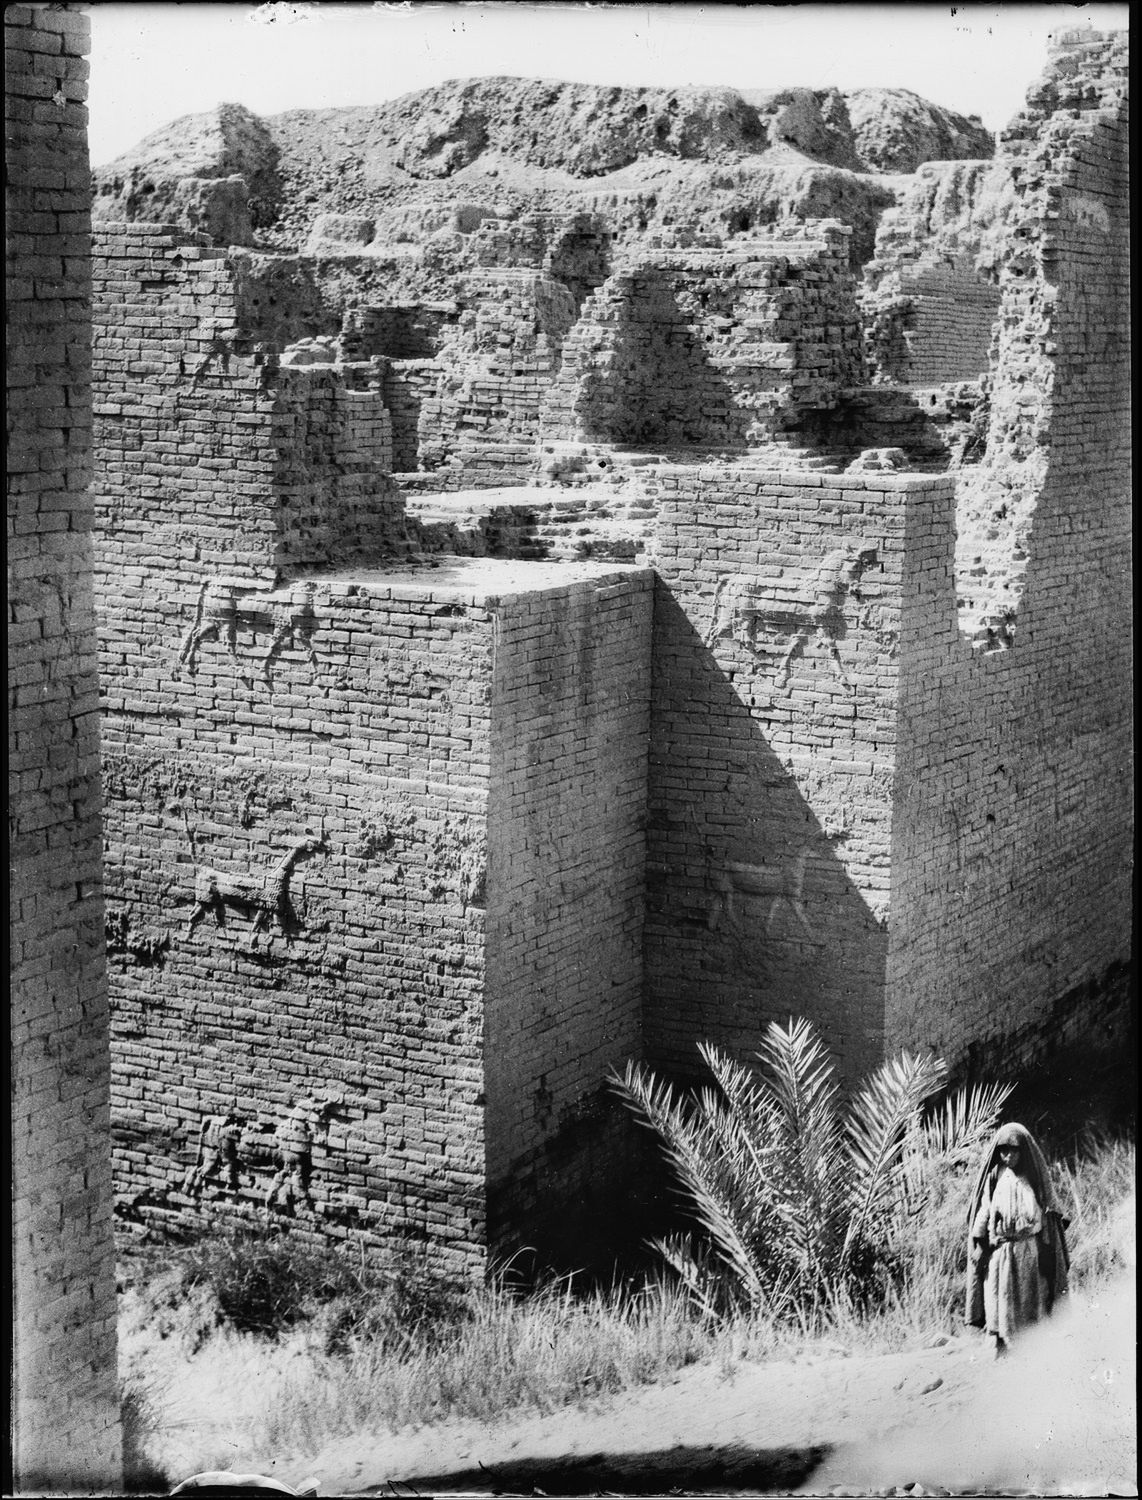 "Photo of remnants from excavations in Babylon from the 1930s."